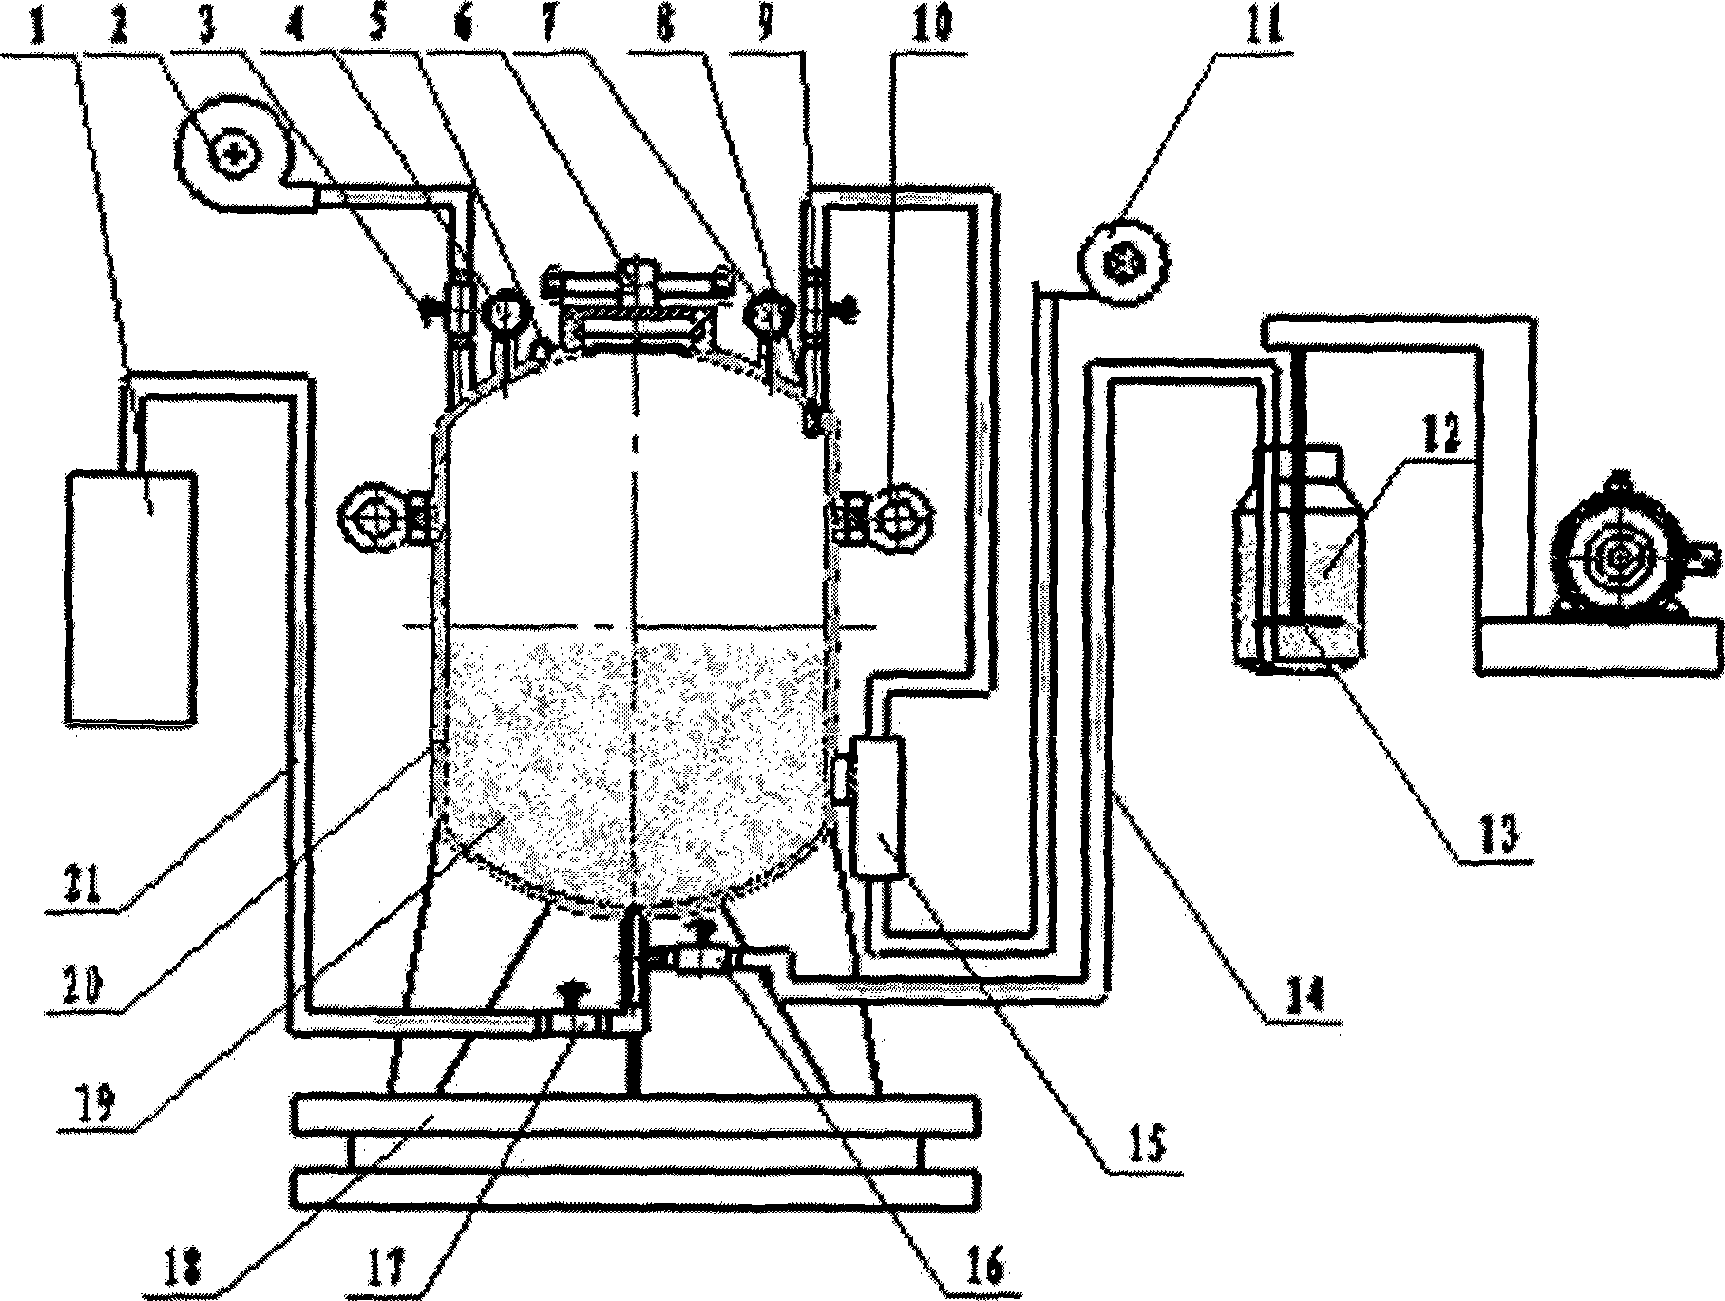 Re-injection process and equipment for poured resin adhesive solution when discharging air bubbles during composite material RTM molding process